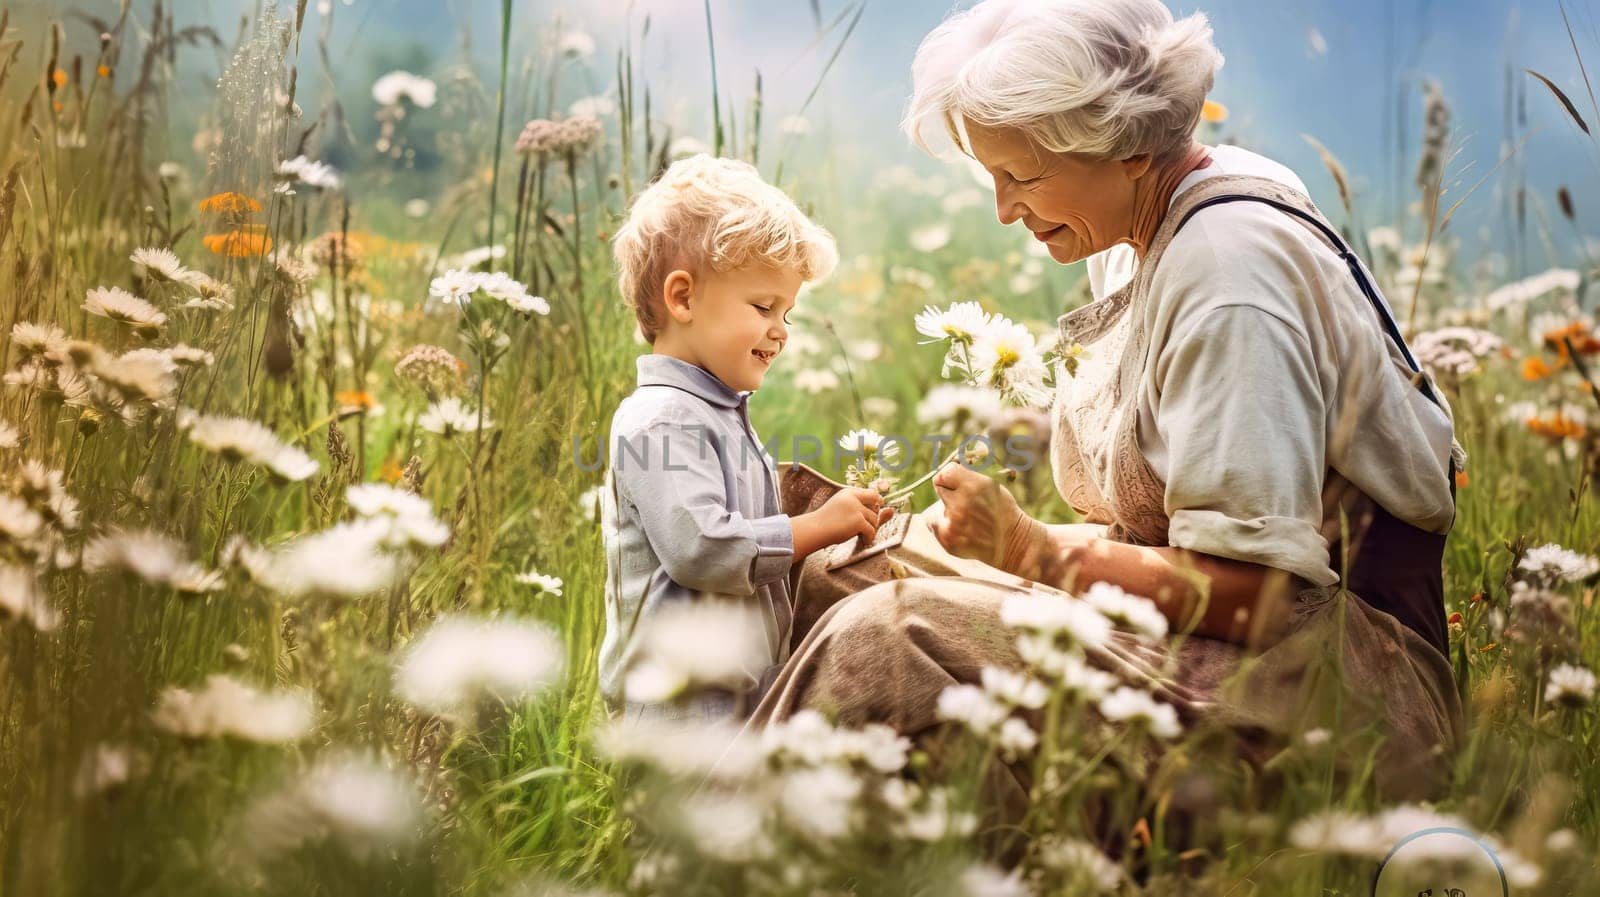 Enchanting image of a mom in a field with flowers, radiating warmth and natural beauty. Standard visual capturing the essence of motherhood and nature.